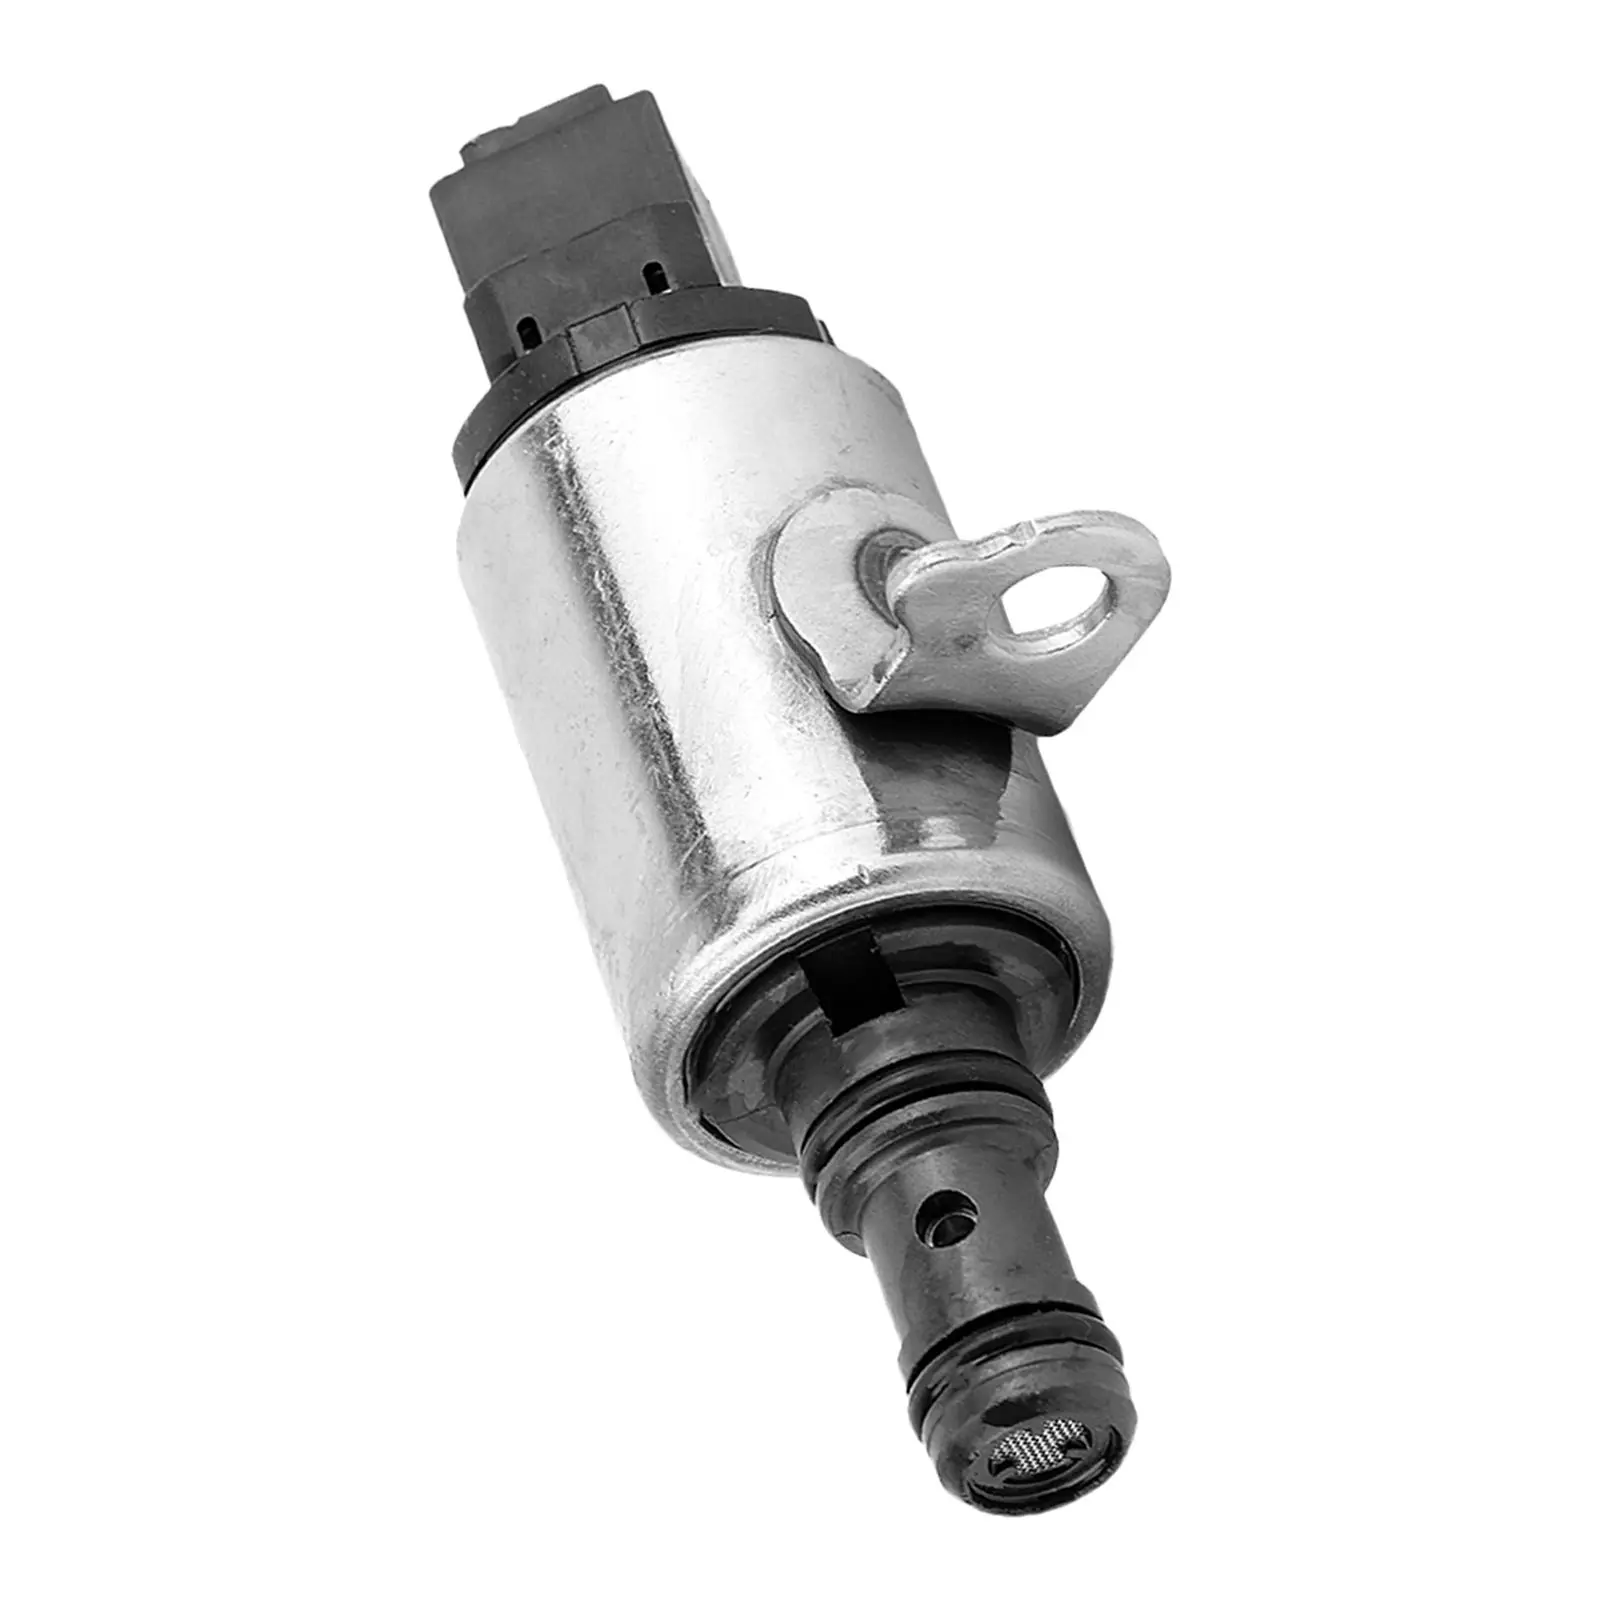 New Transmission  Solenoid Replacement for Honda Accord  CR-V